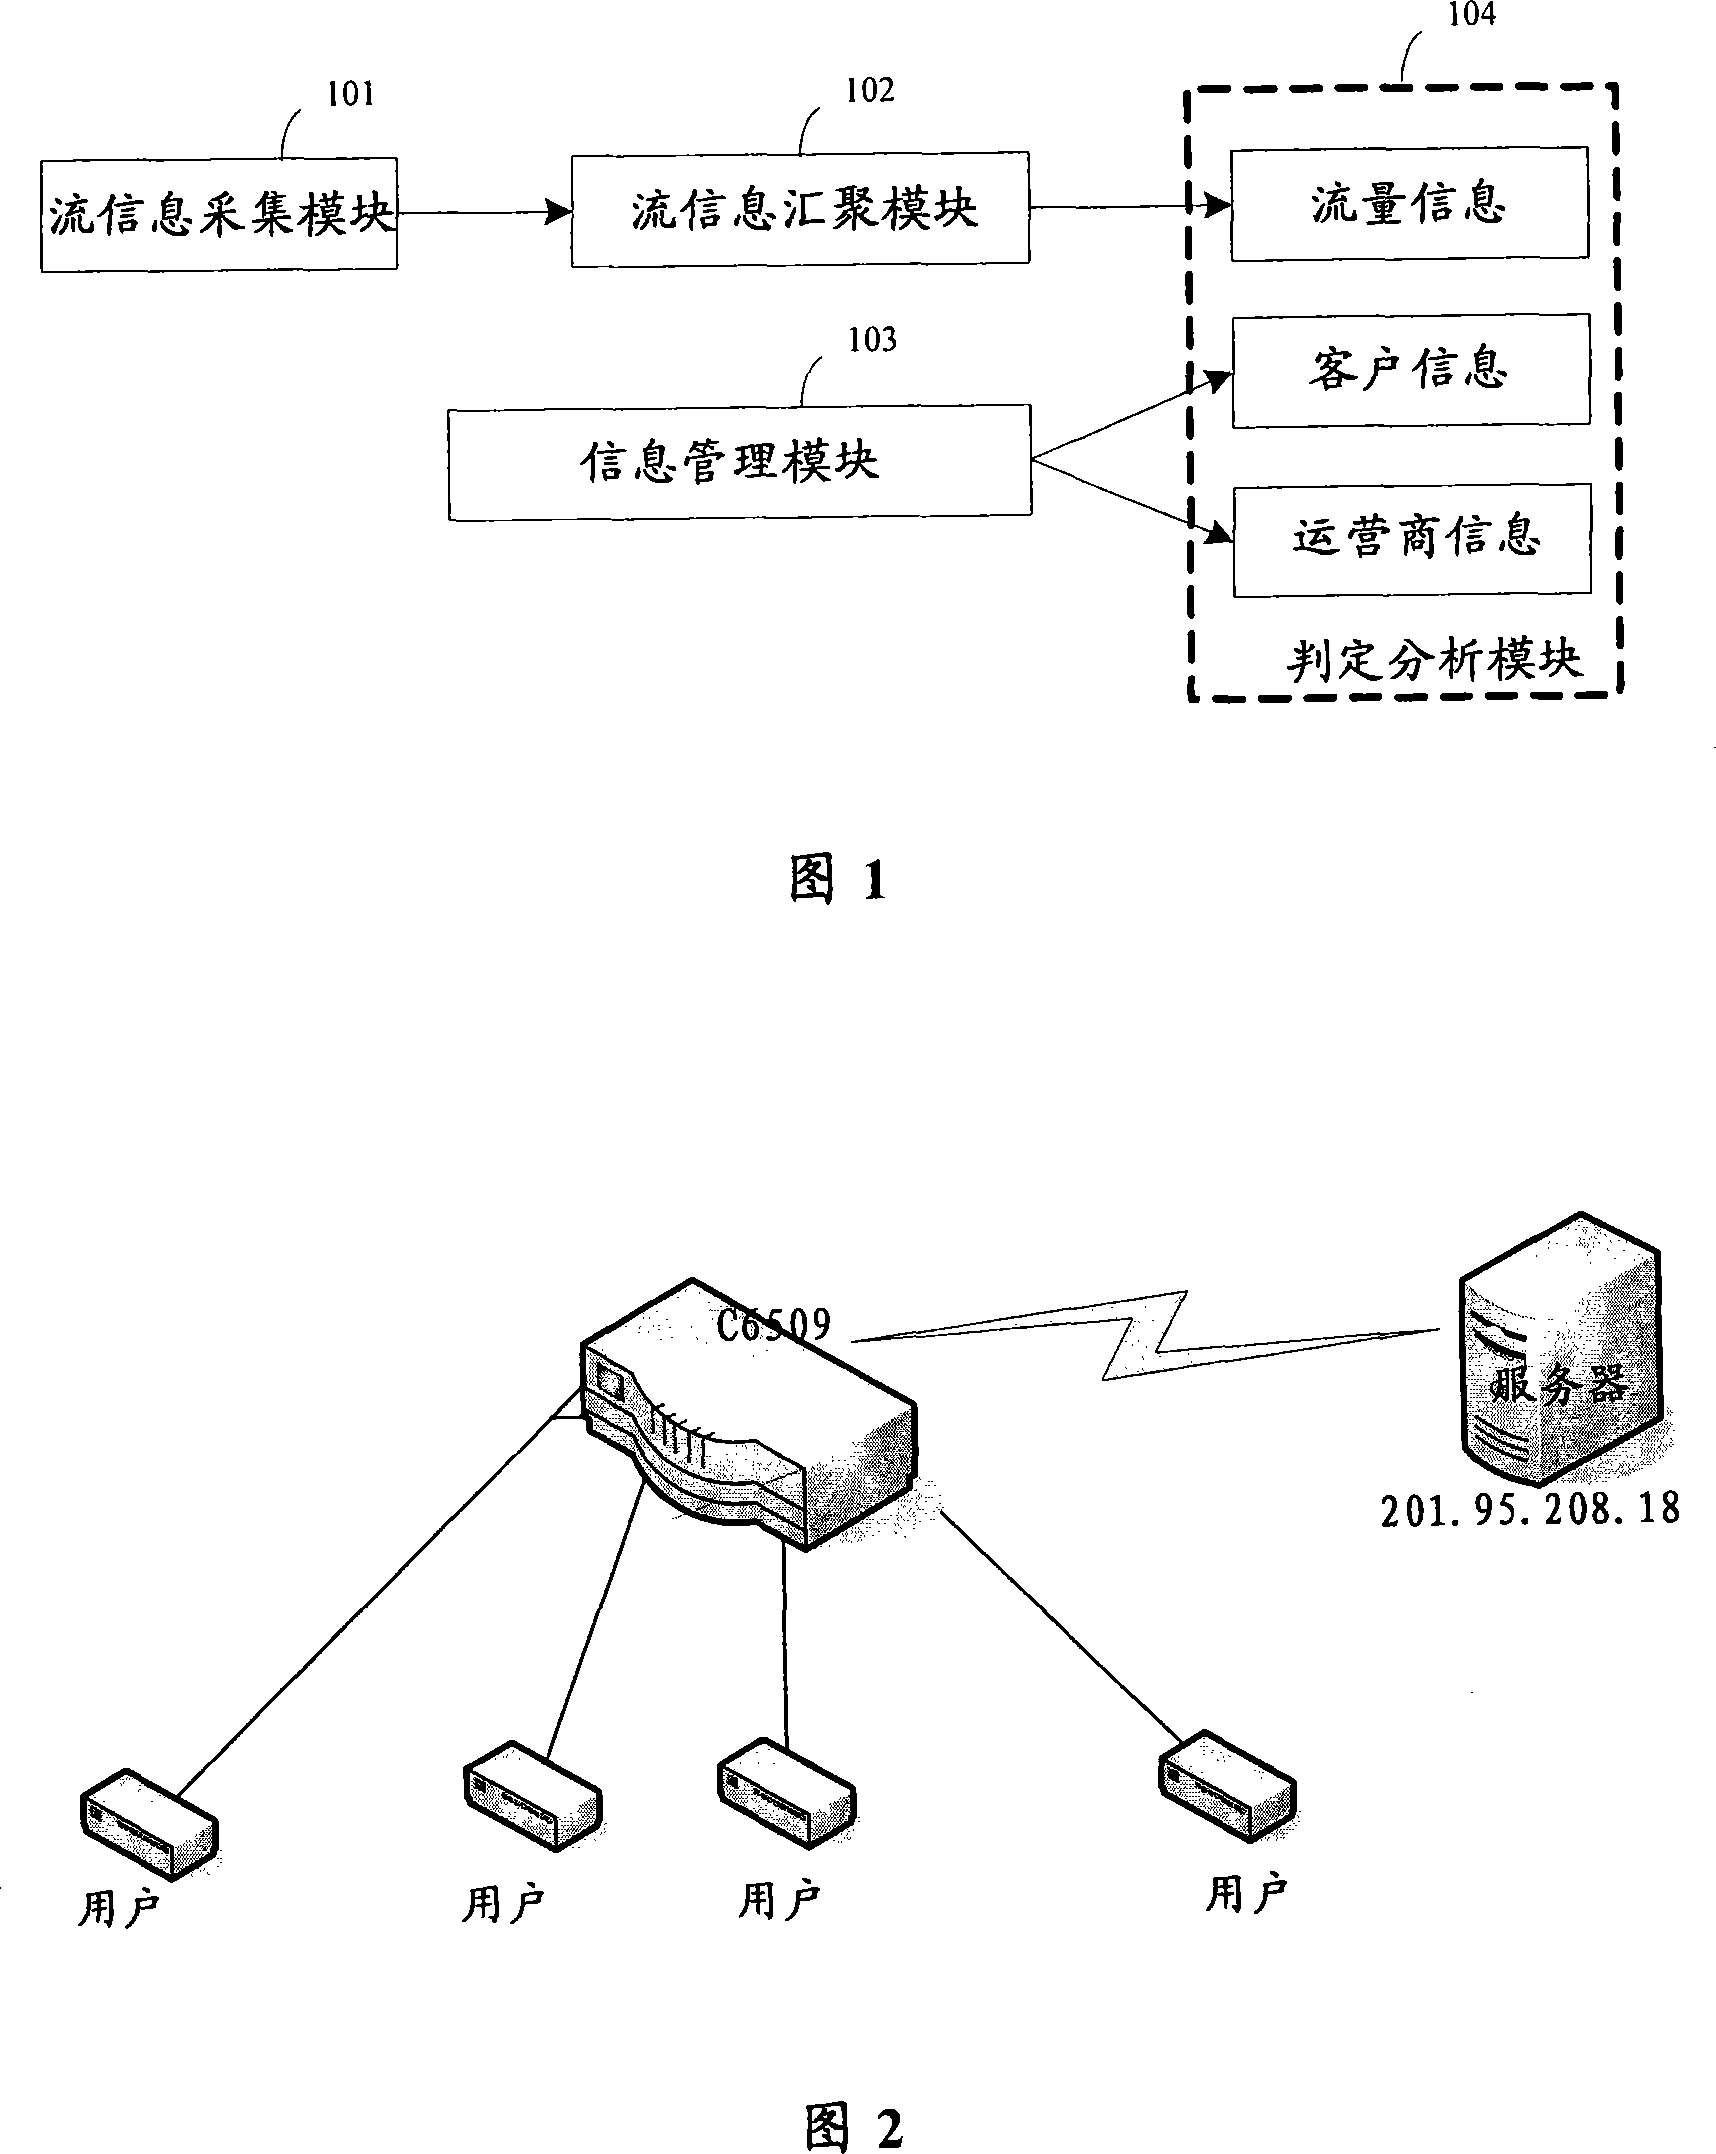 System and method for detecting illegal access